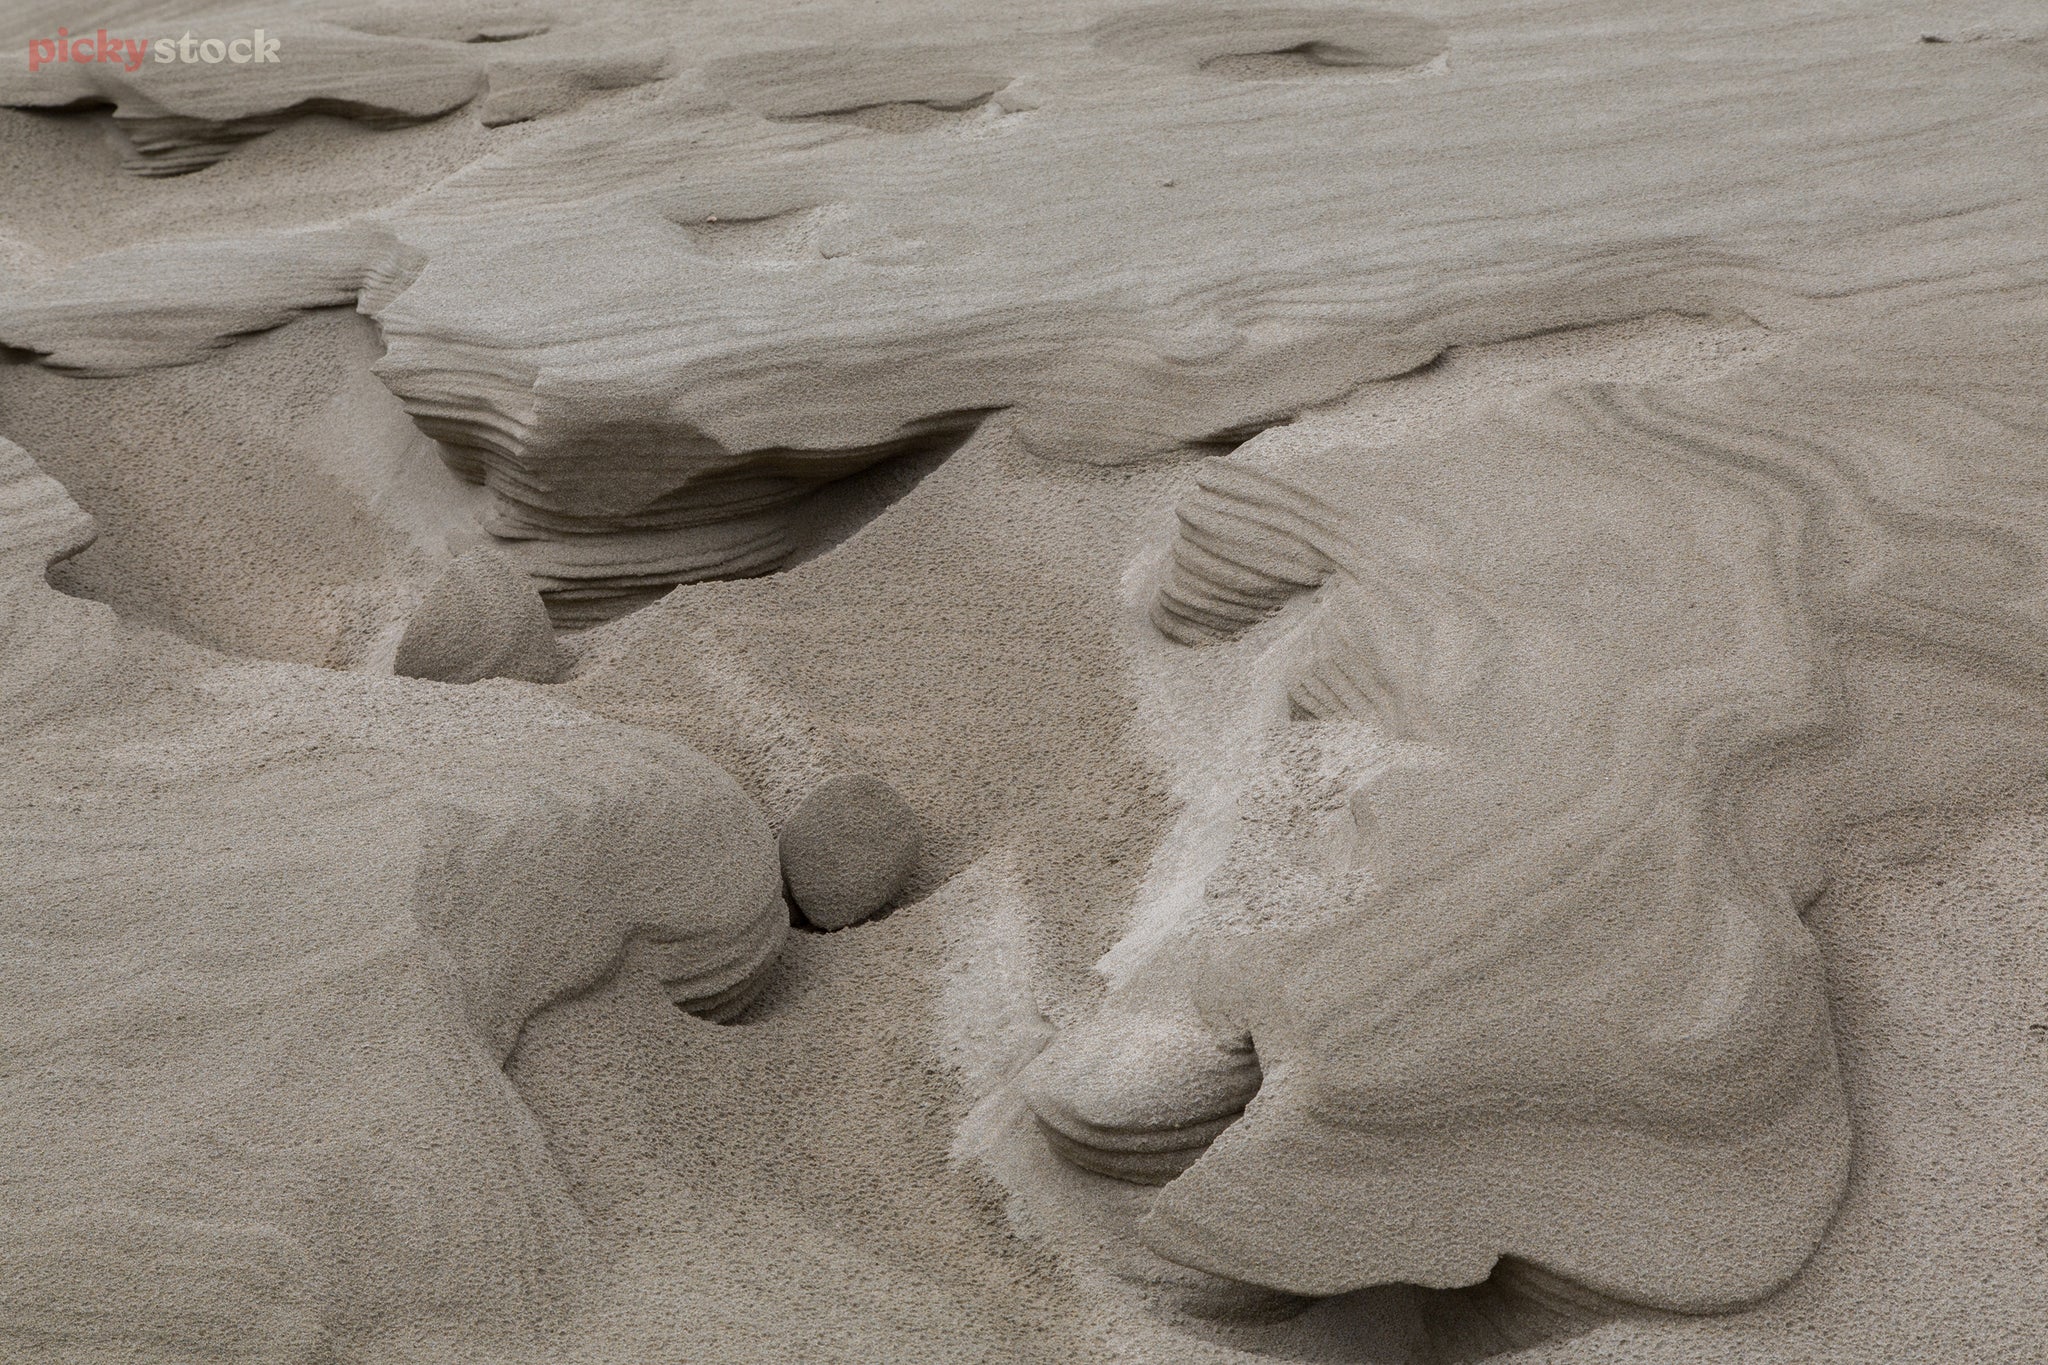 Landscape close up of sand dune eroding into striated cliffs and valleys.